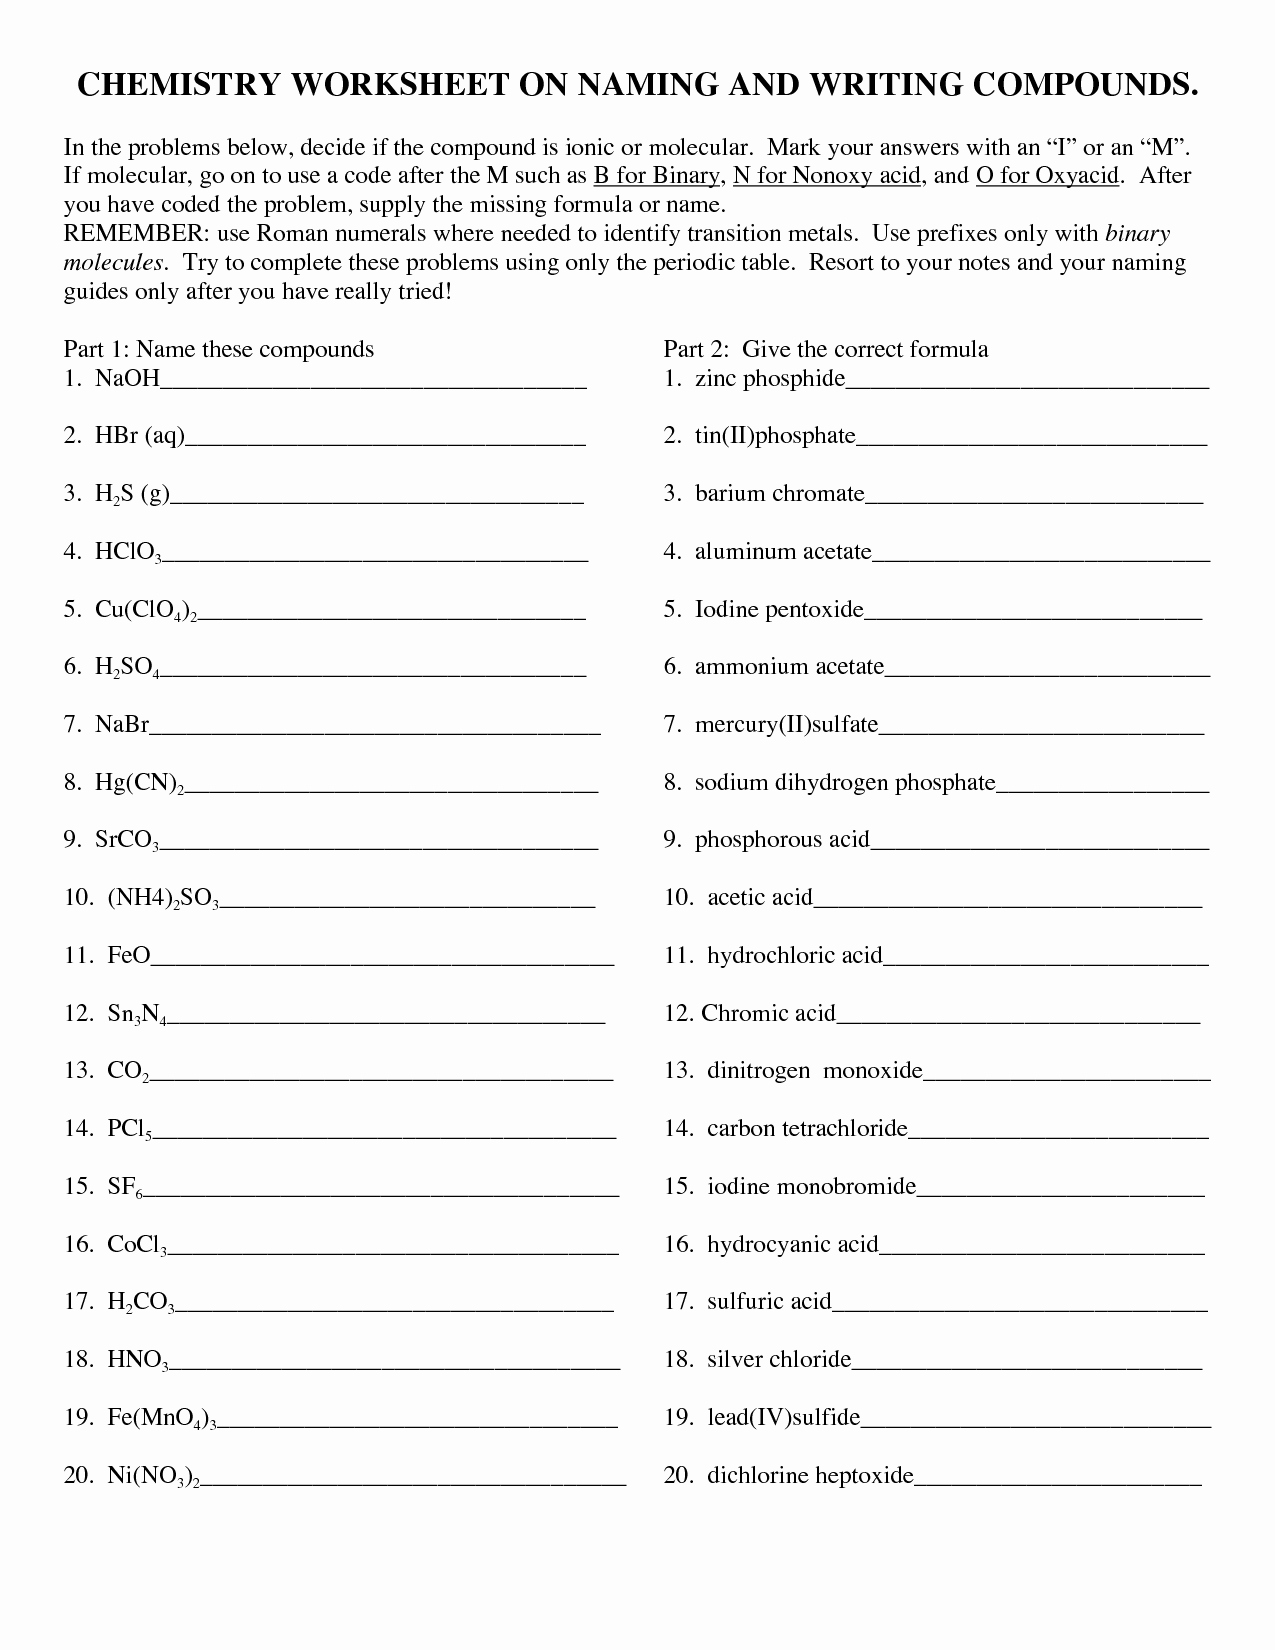 Organic Compounds Worksheet Answers New 9 Best Of Identifying organic Pounds Worksheet